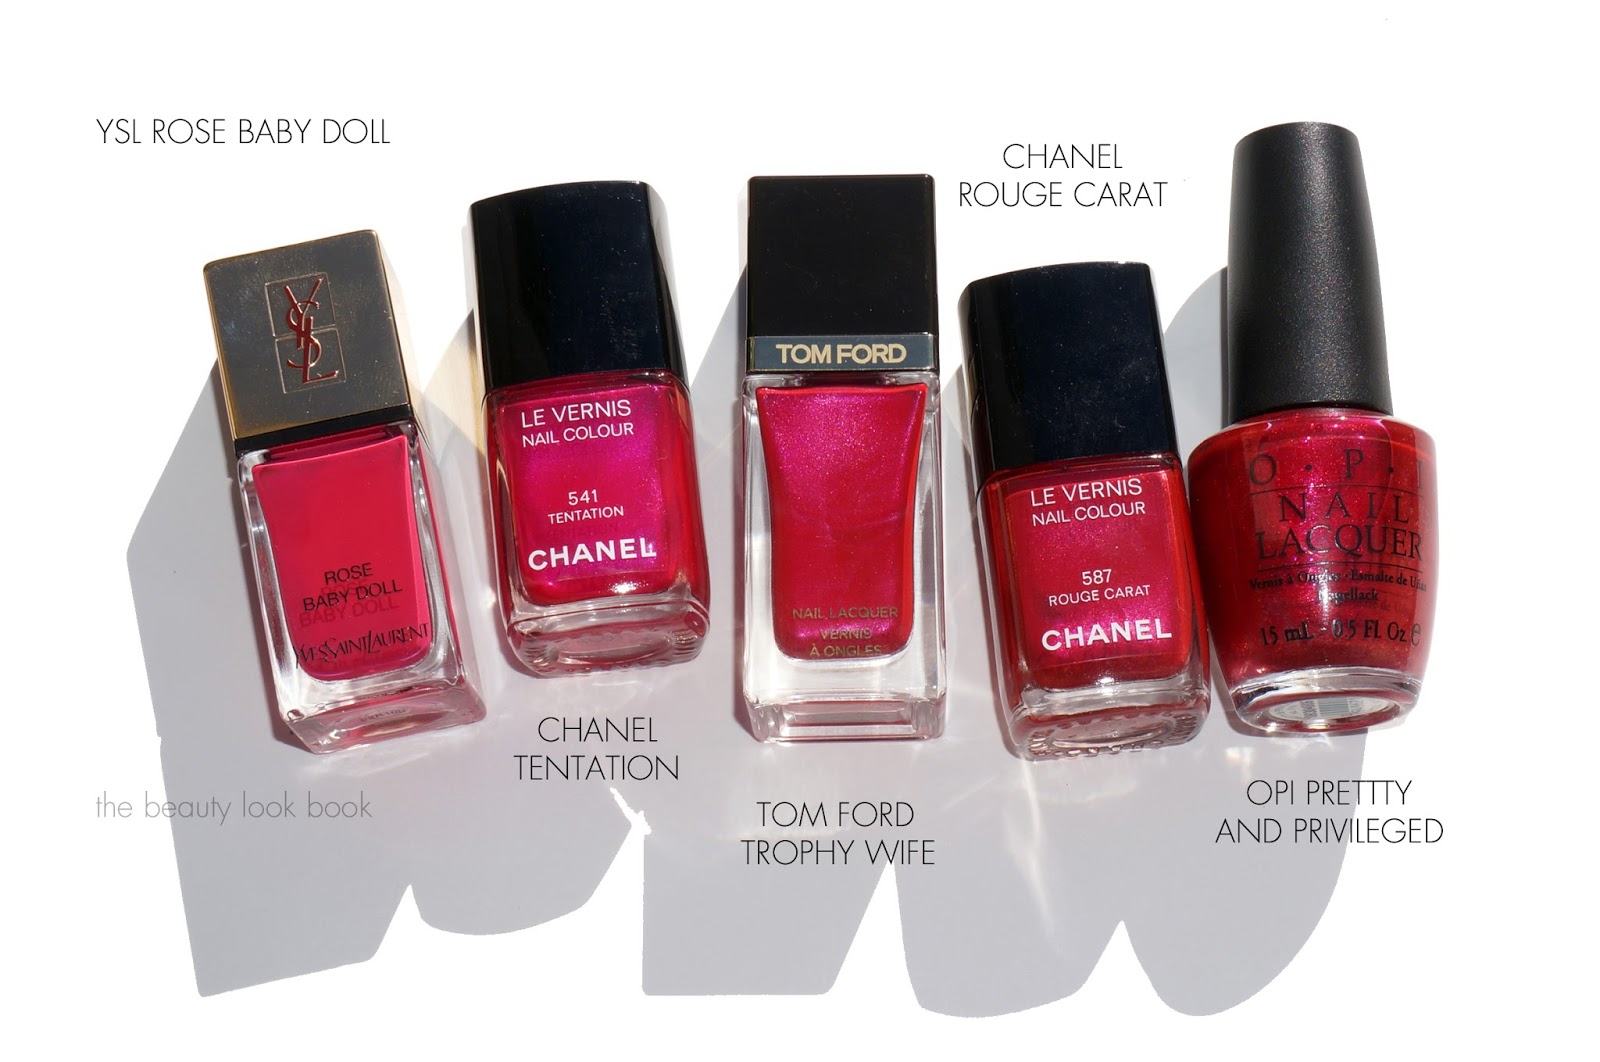 Tom Ford Trophy Wife Nail Lacquer Comparisons - The Beauty Look Book